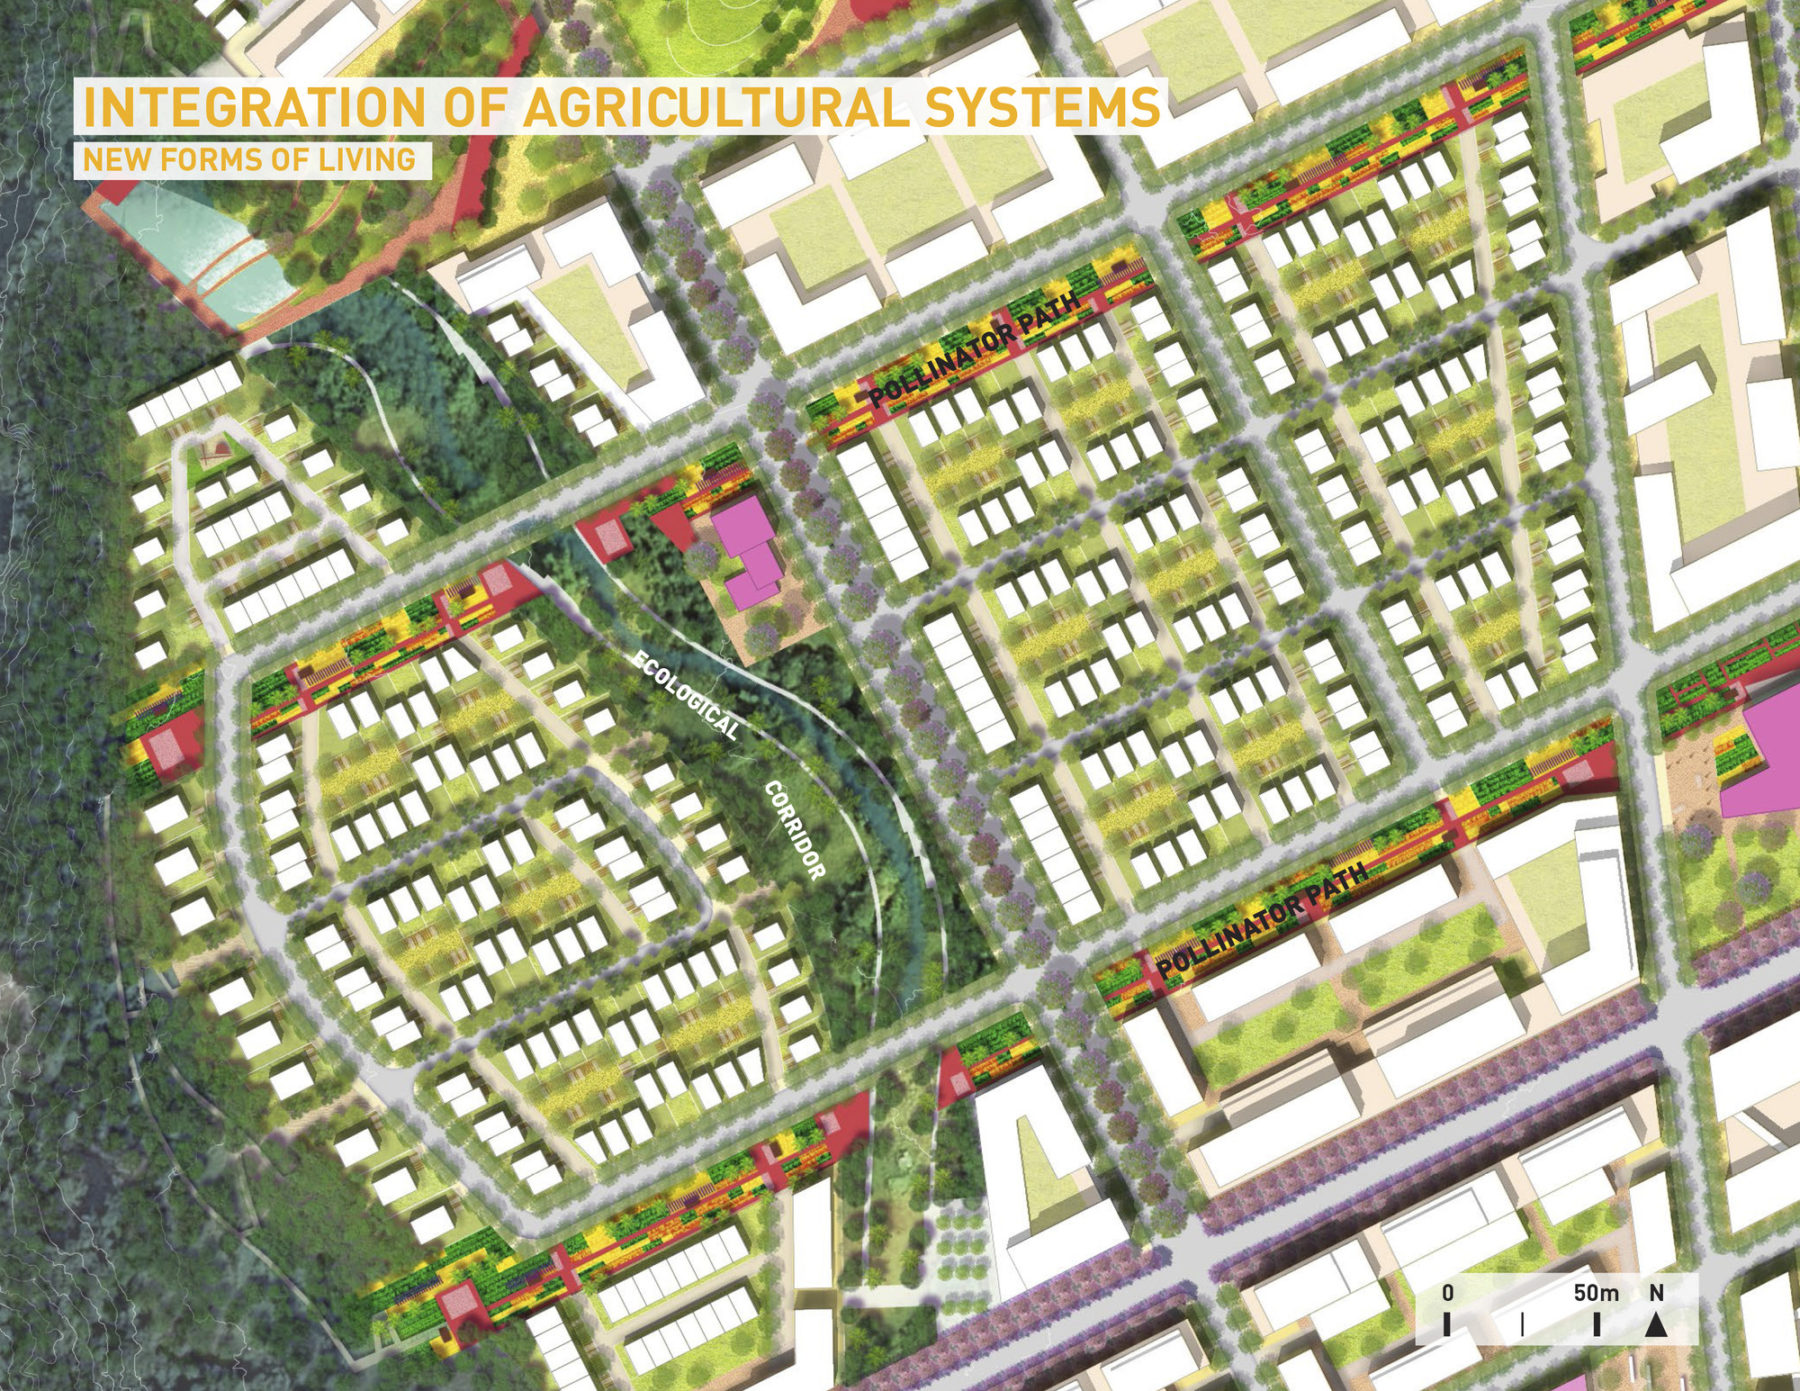 Ananas New Community with cultural hub, sports center, agricultural research, ecological corridors, and others